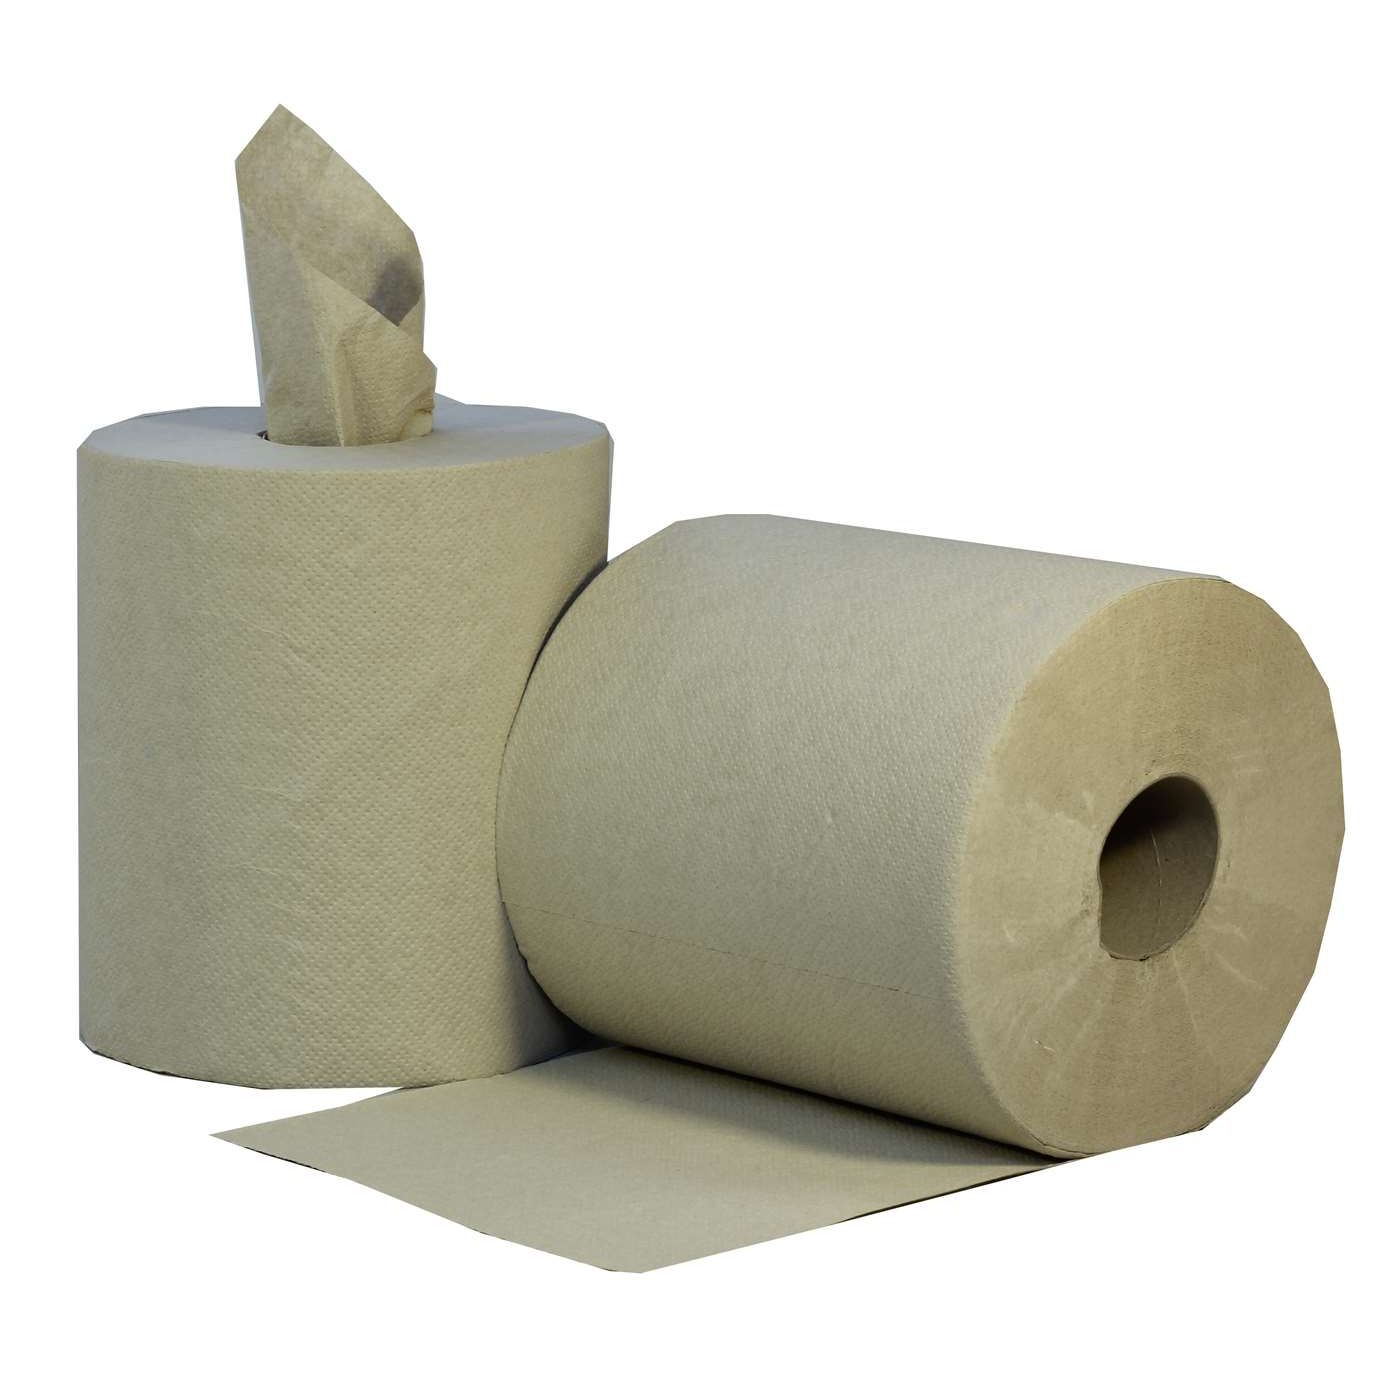 EcoNatural 2 Ply Udder Wipes 22.5cm x 130m Case of 6 Rolls, Made from Recycled Drinks Cartons